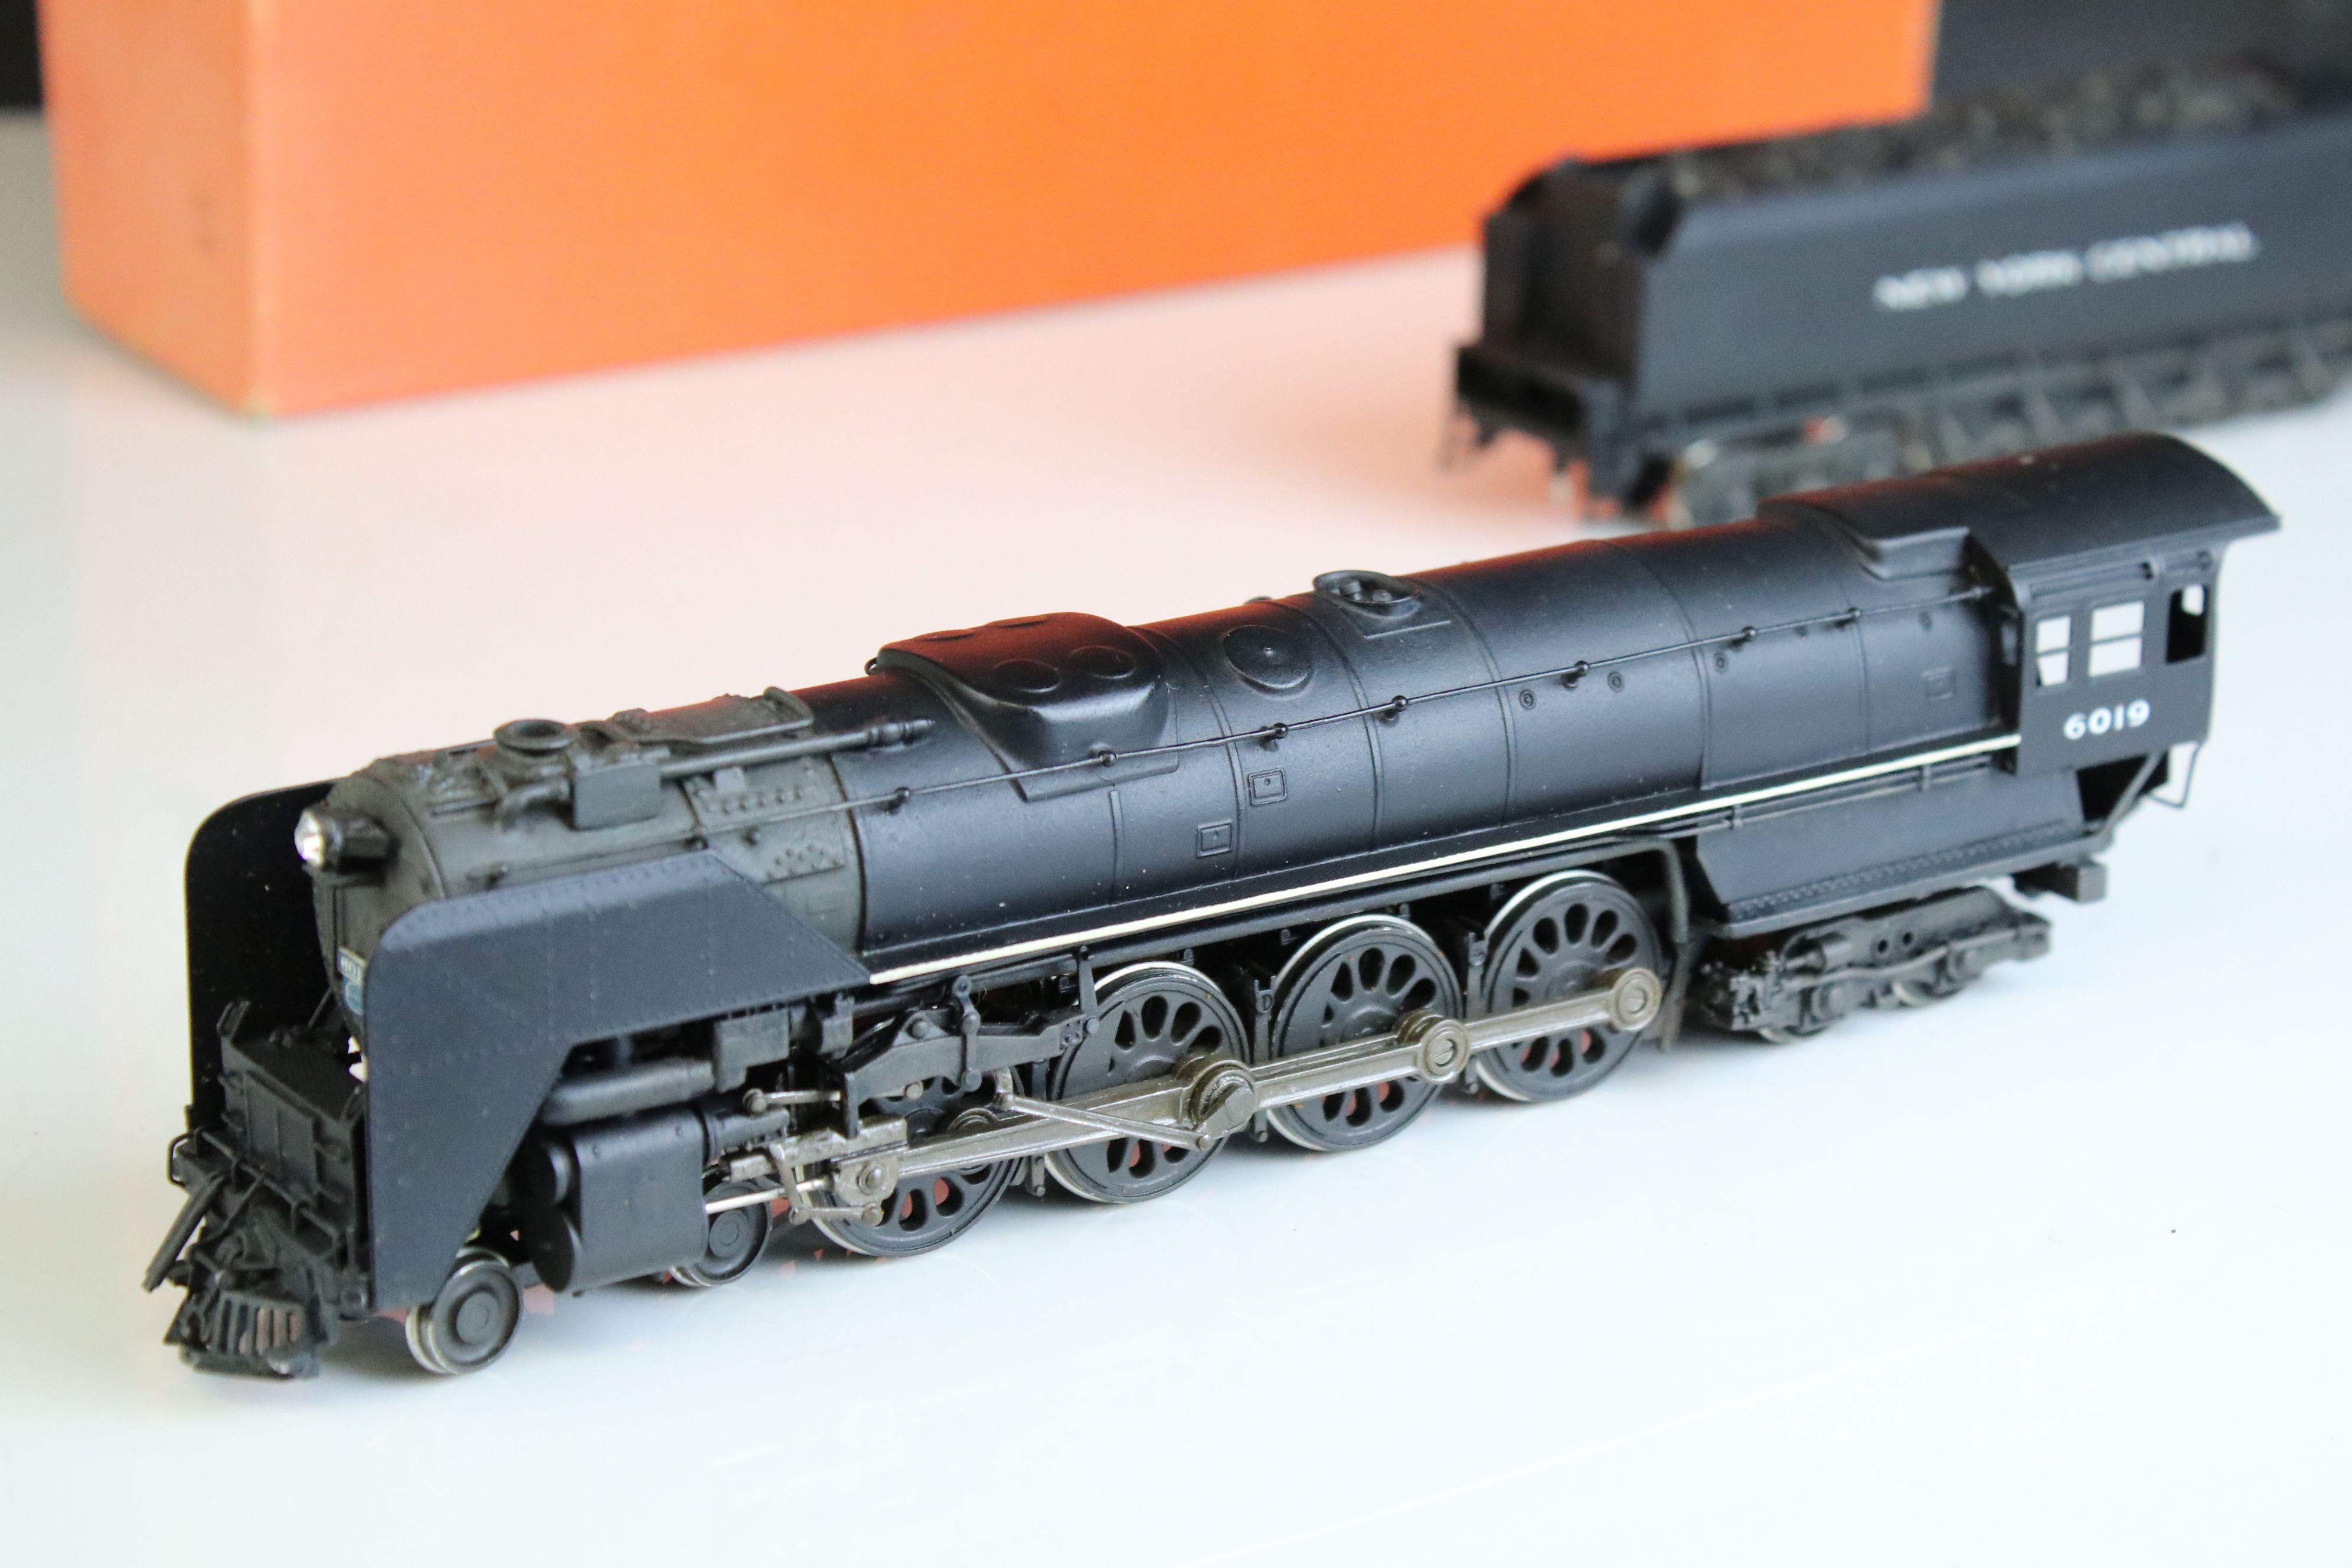 Boxed Nickel Plate Products HO gauge New York Central Niagara 4-8-4 brass locomotive & tender (KMT - Image 2 of 11